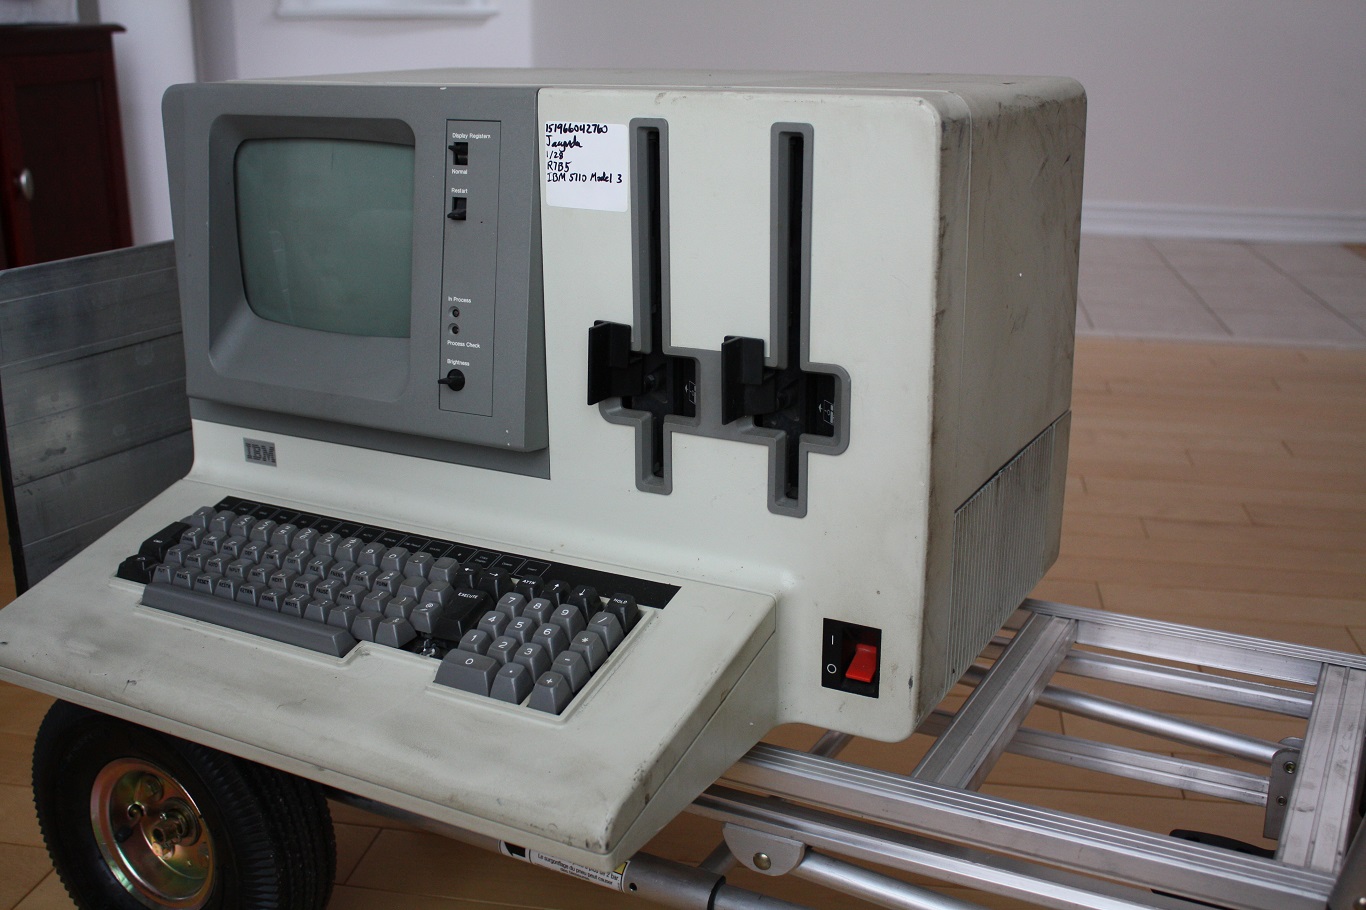 IBM 5120 - new arrival front view